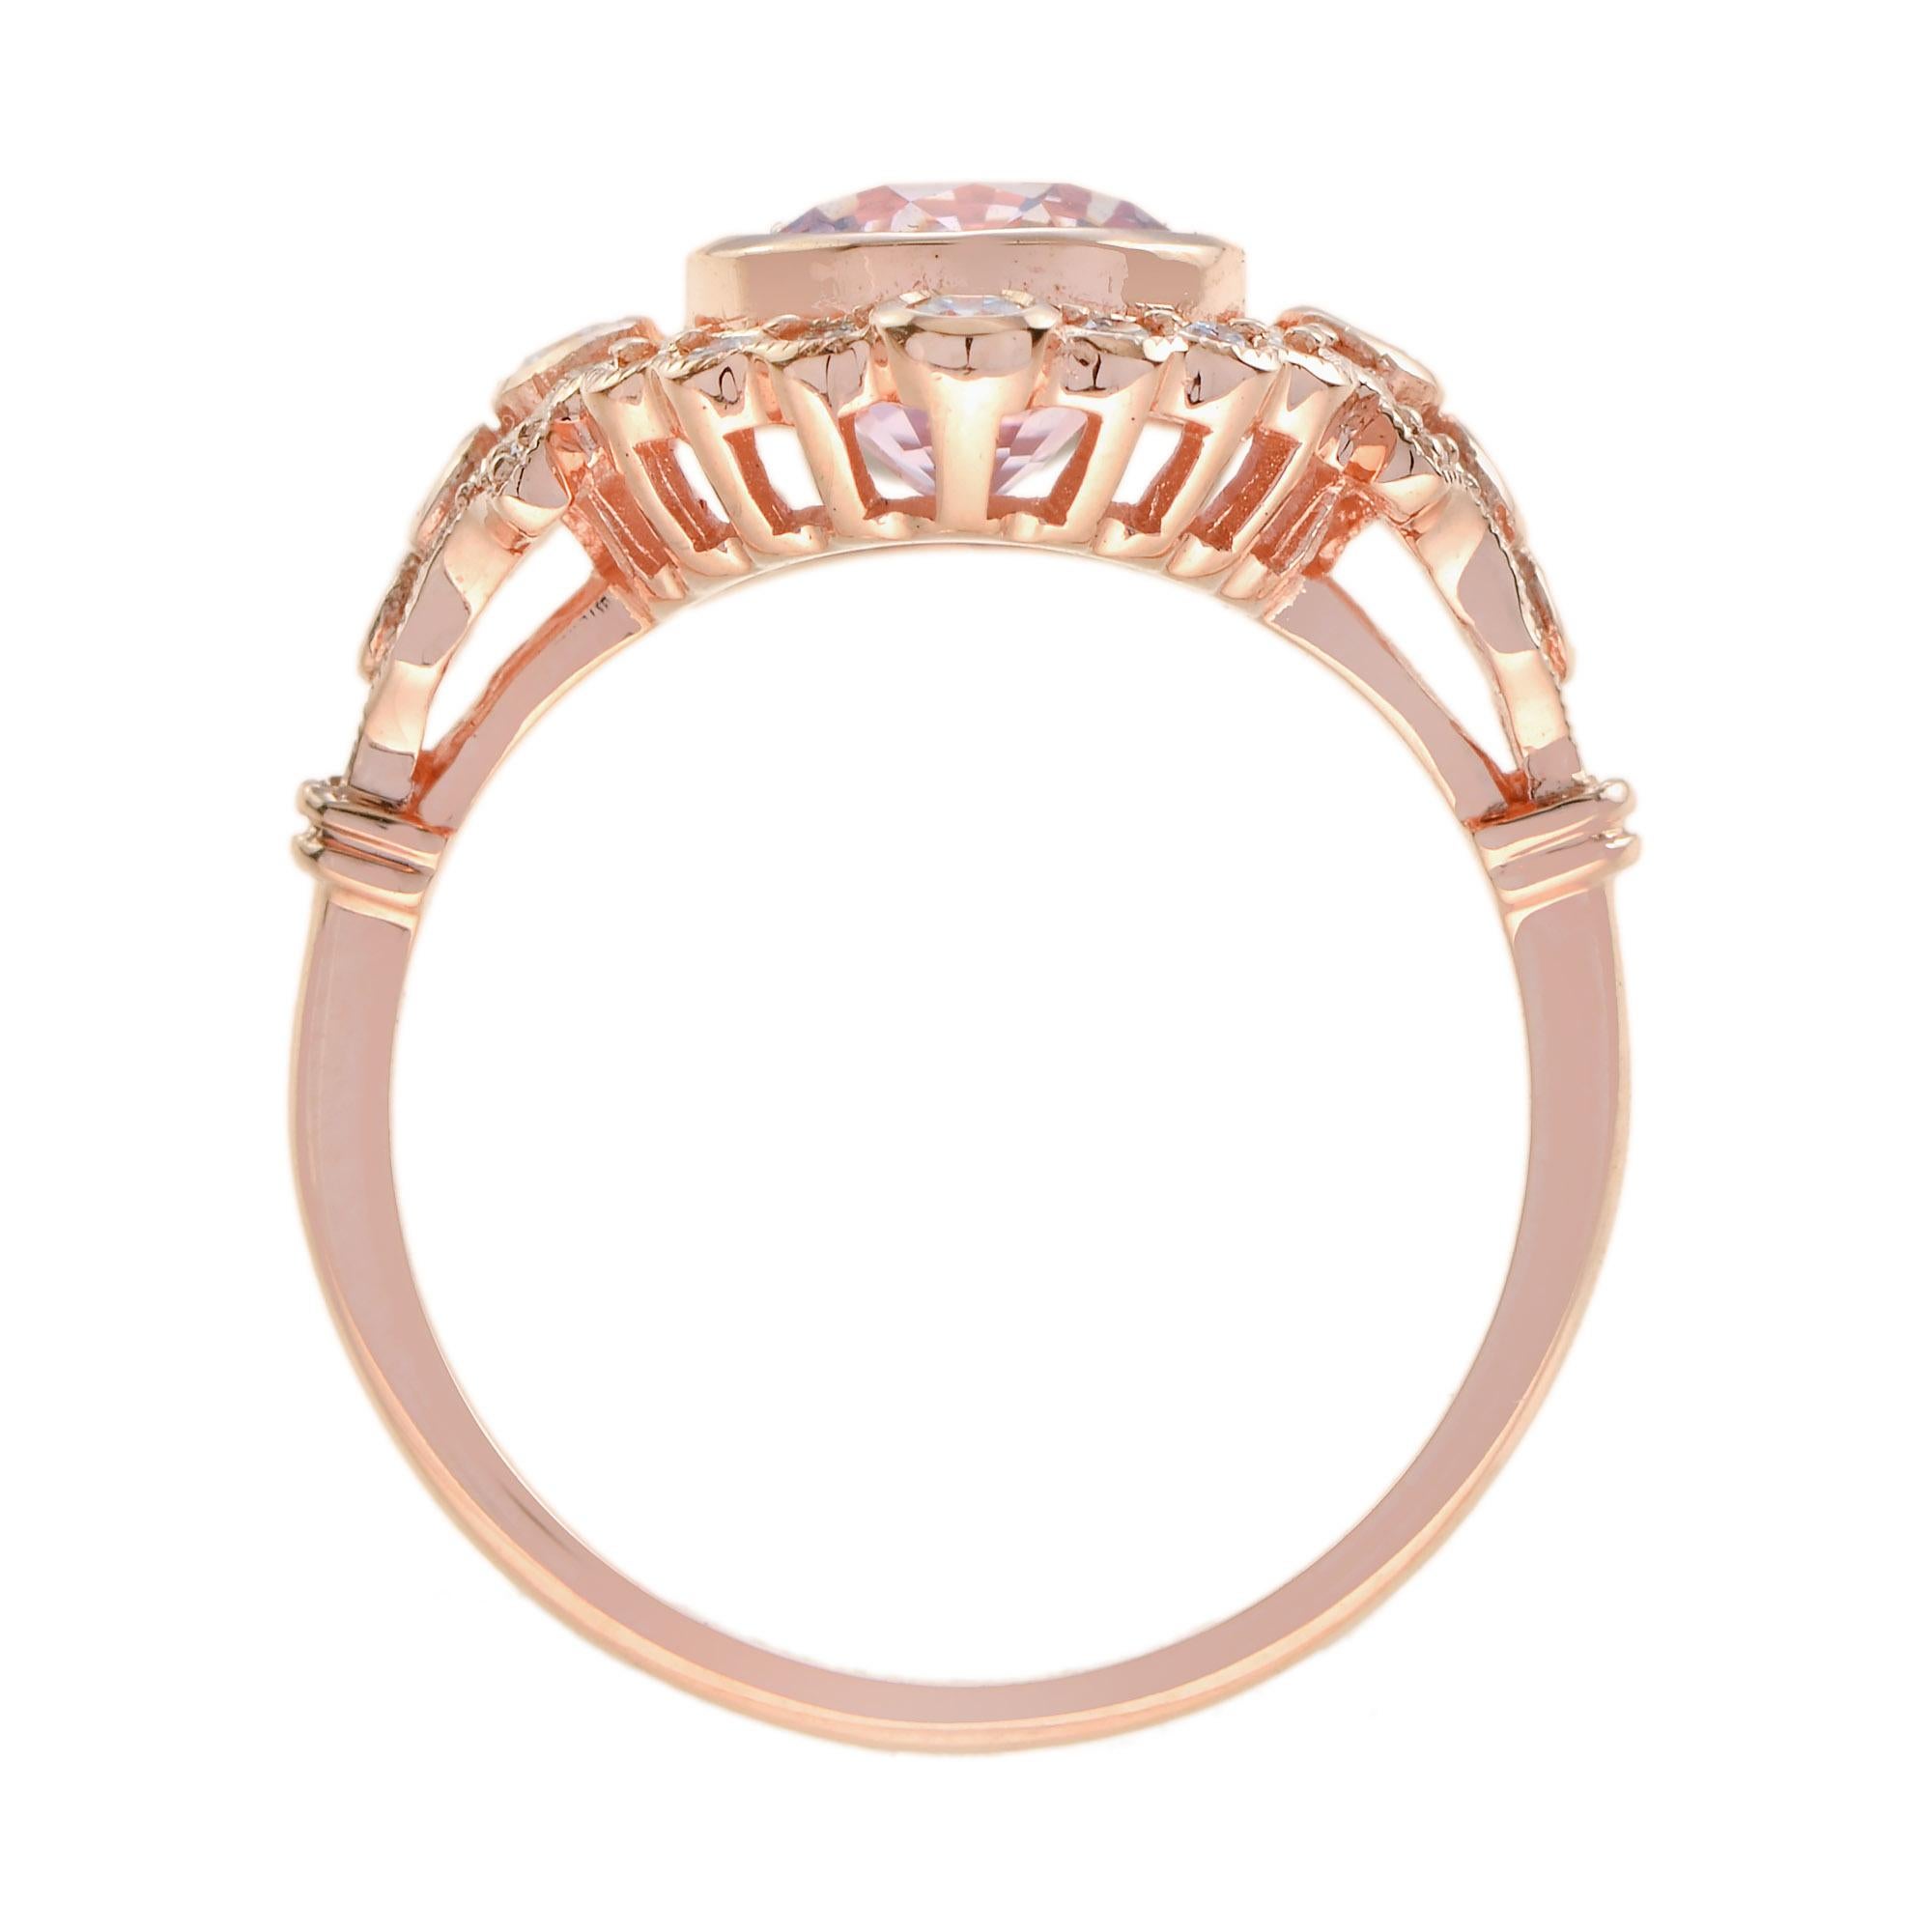 For Sale:  2.50 Ct. Morganite Diamond Vintage Style Halo Engagement Ring in 18K Rose Gold 6